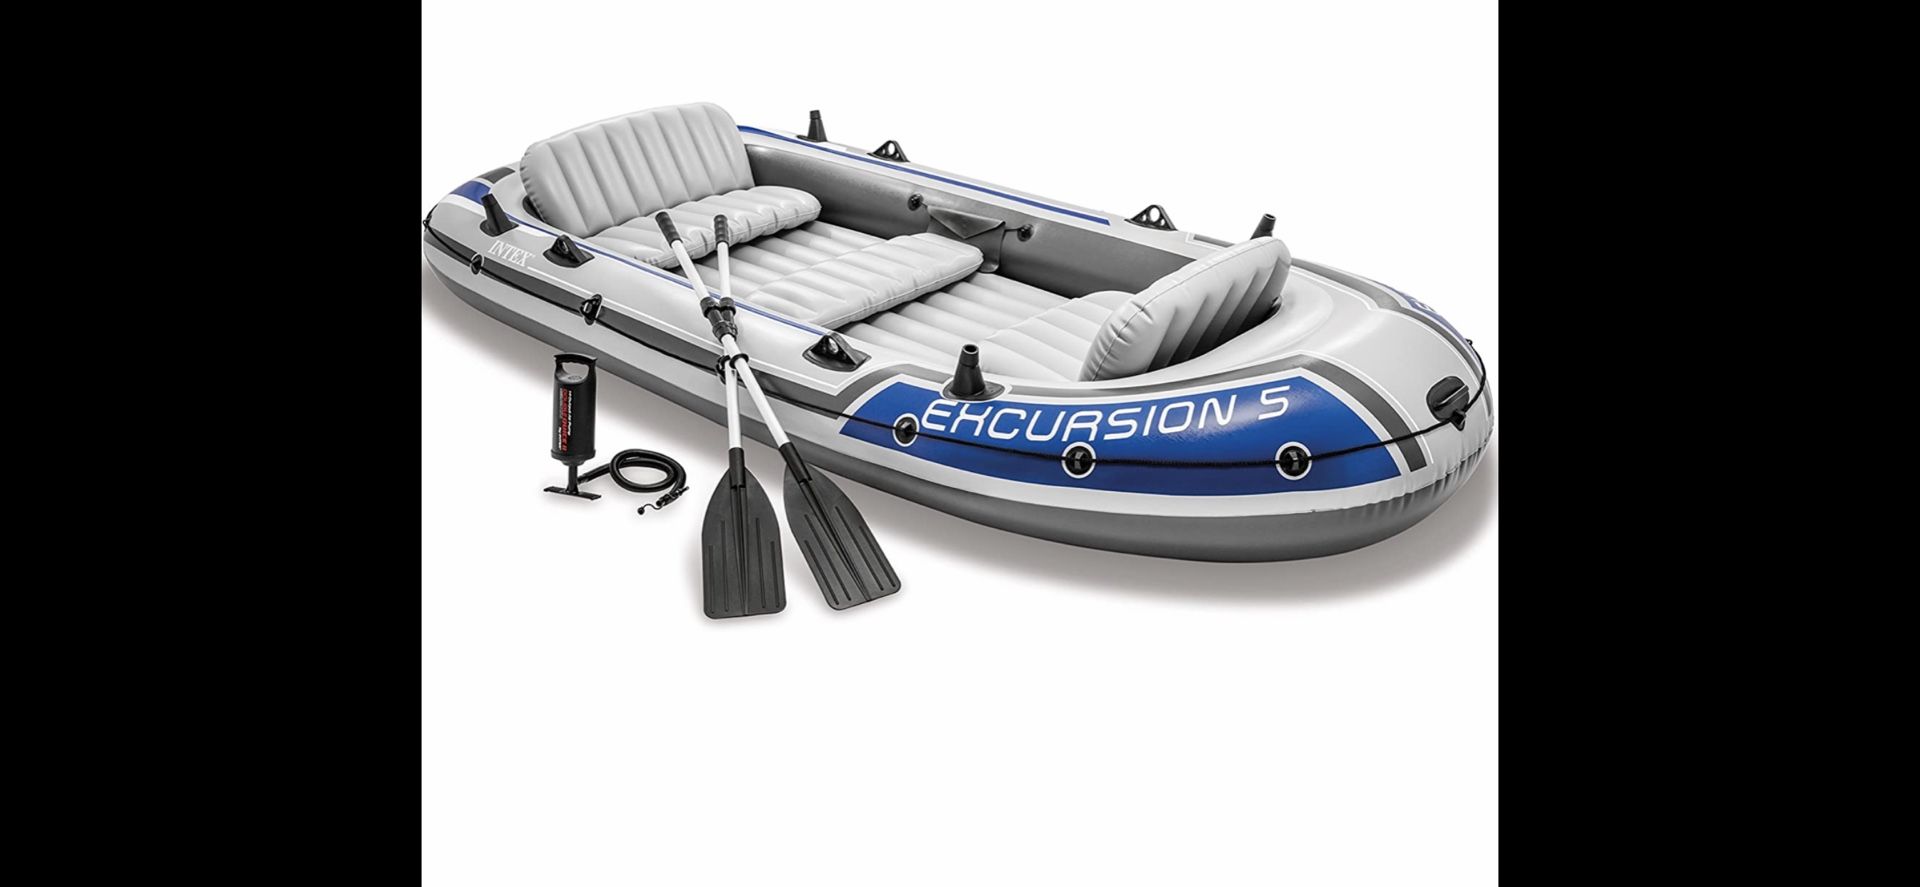 Brand new intex 5 person inflatable boat